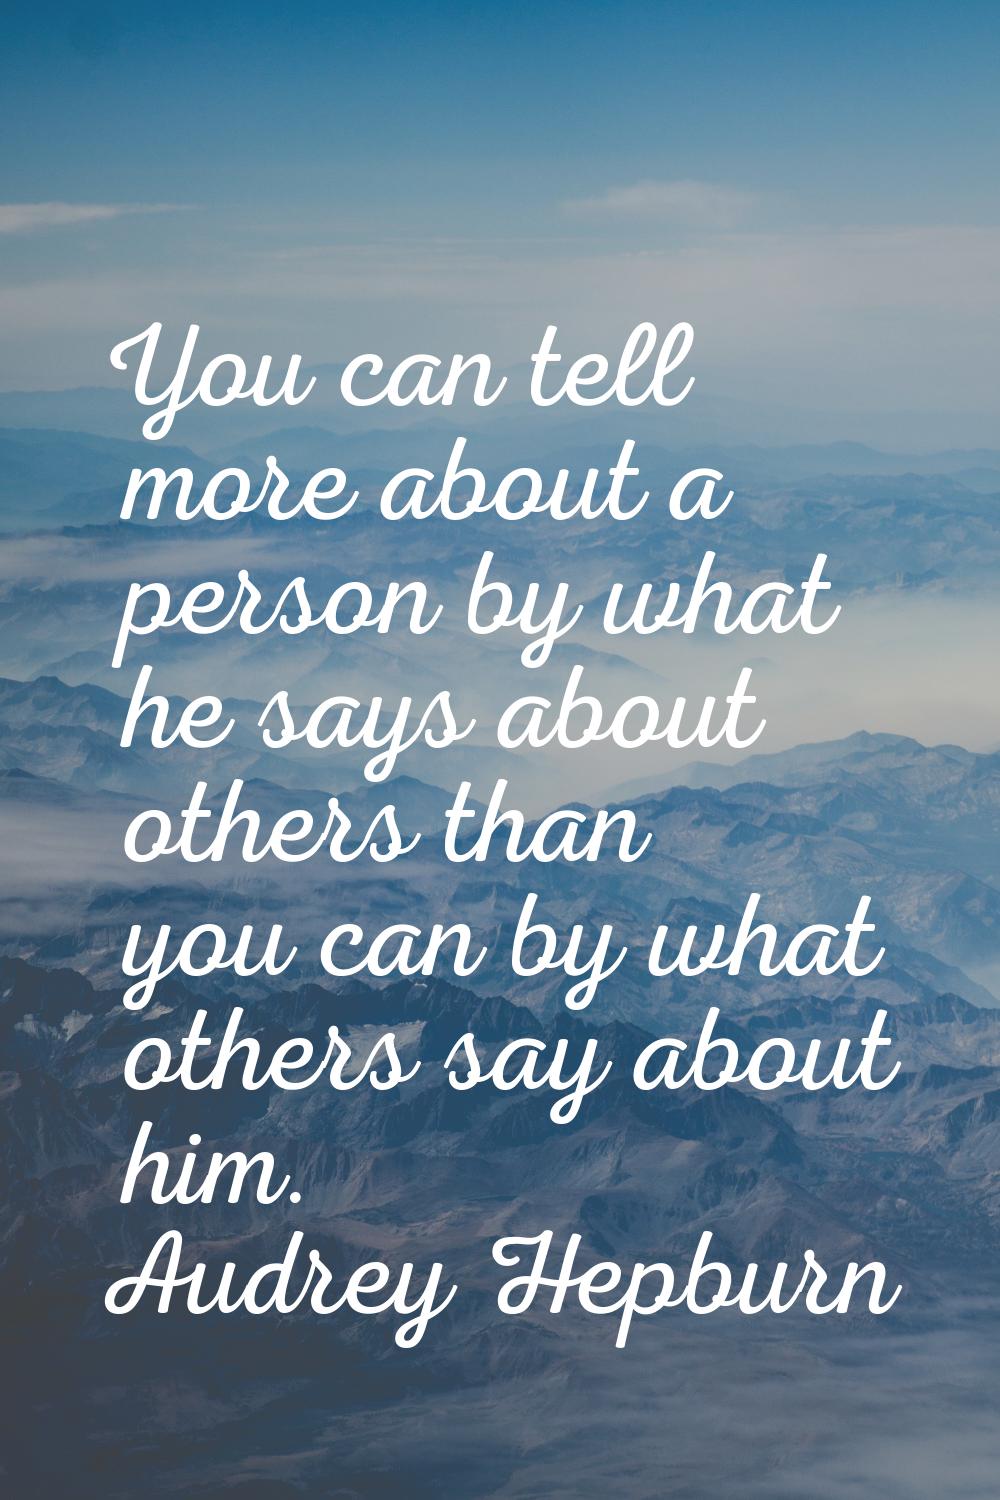 You can tell more about a person by what he says about others than you can by what others say about